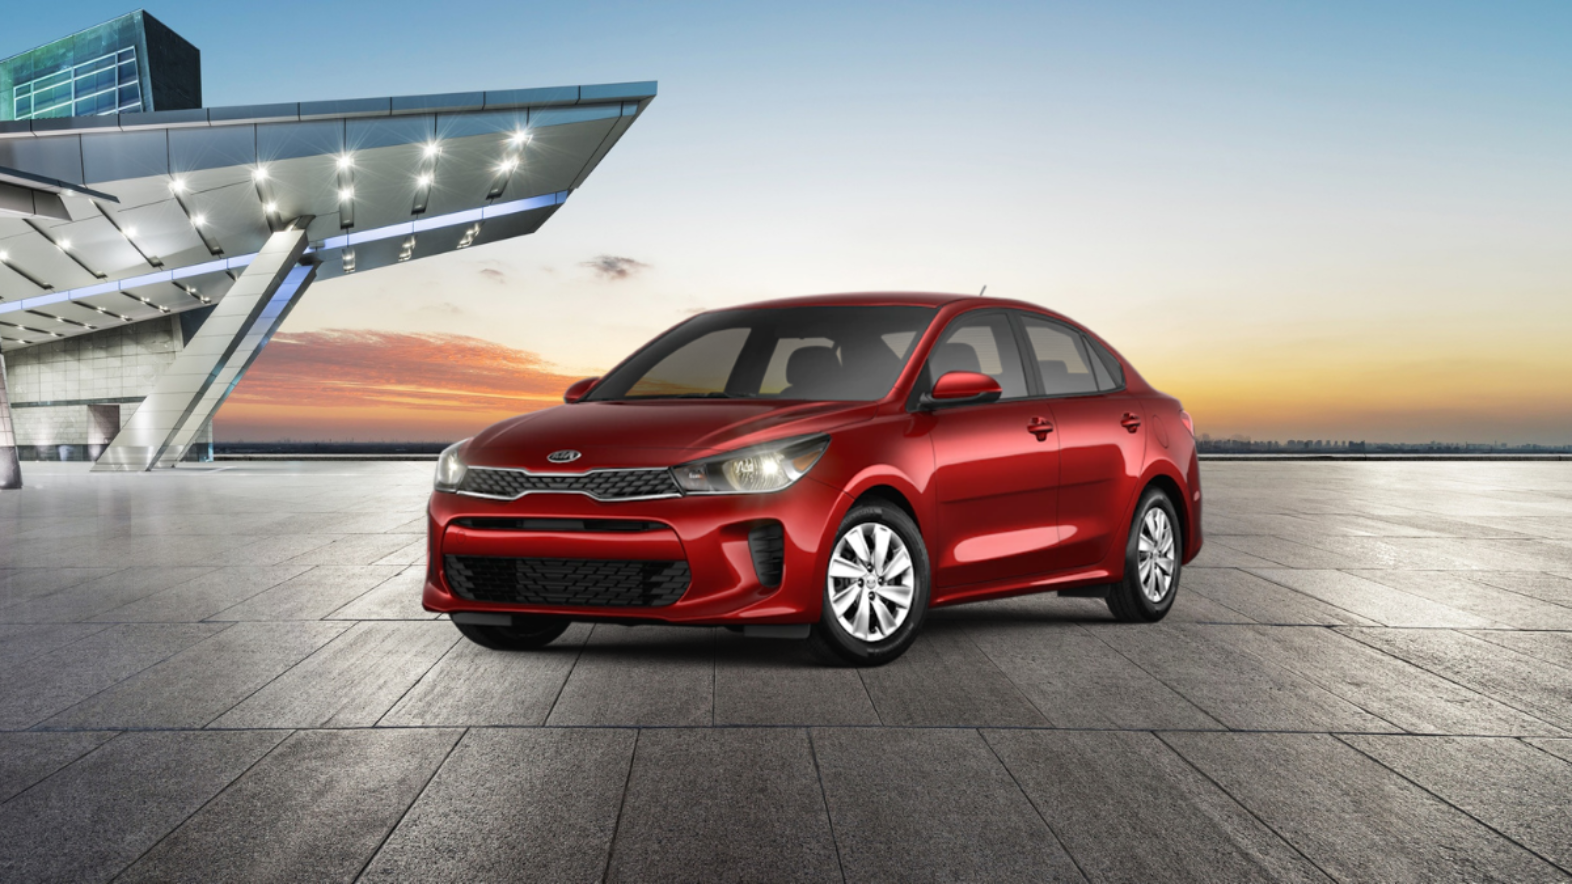 The 2021 Kia Rio S IVT Interior Is A Style Statement Infographic